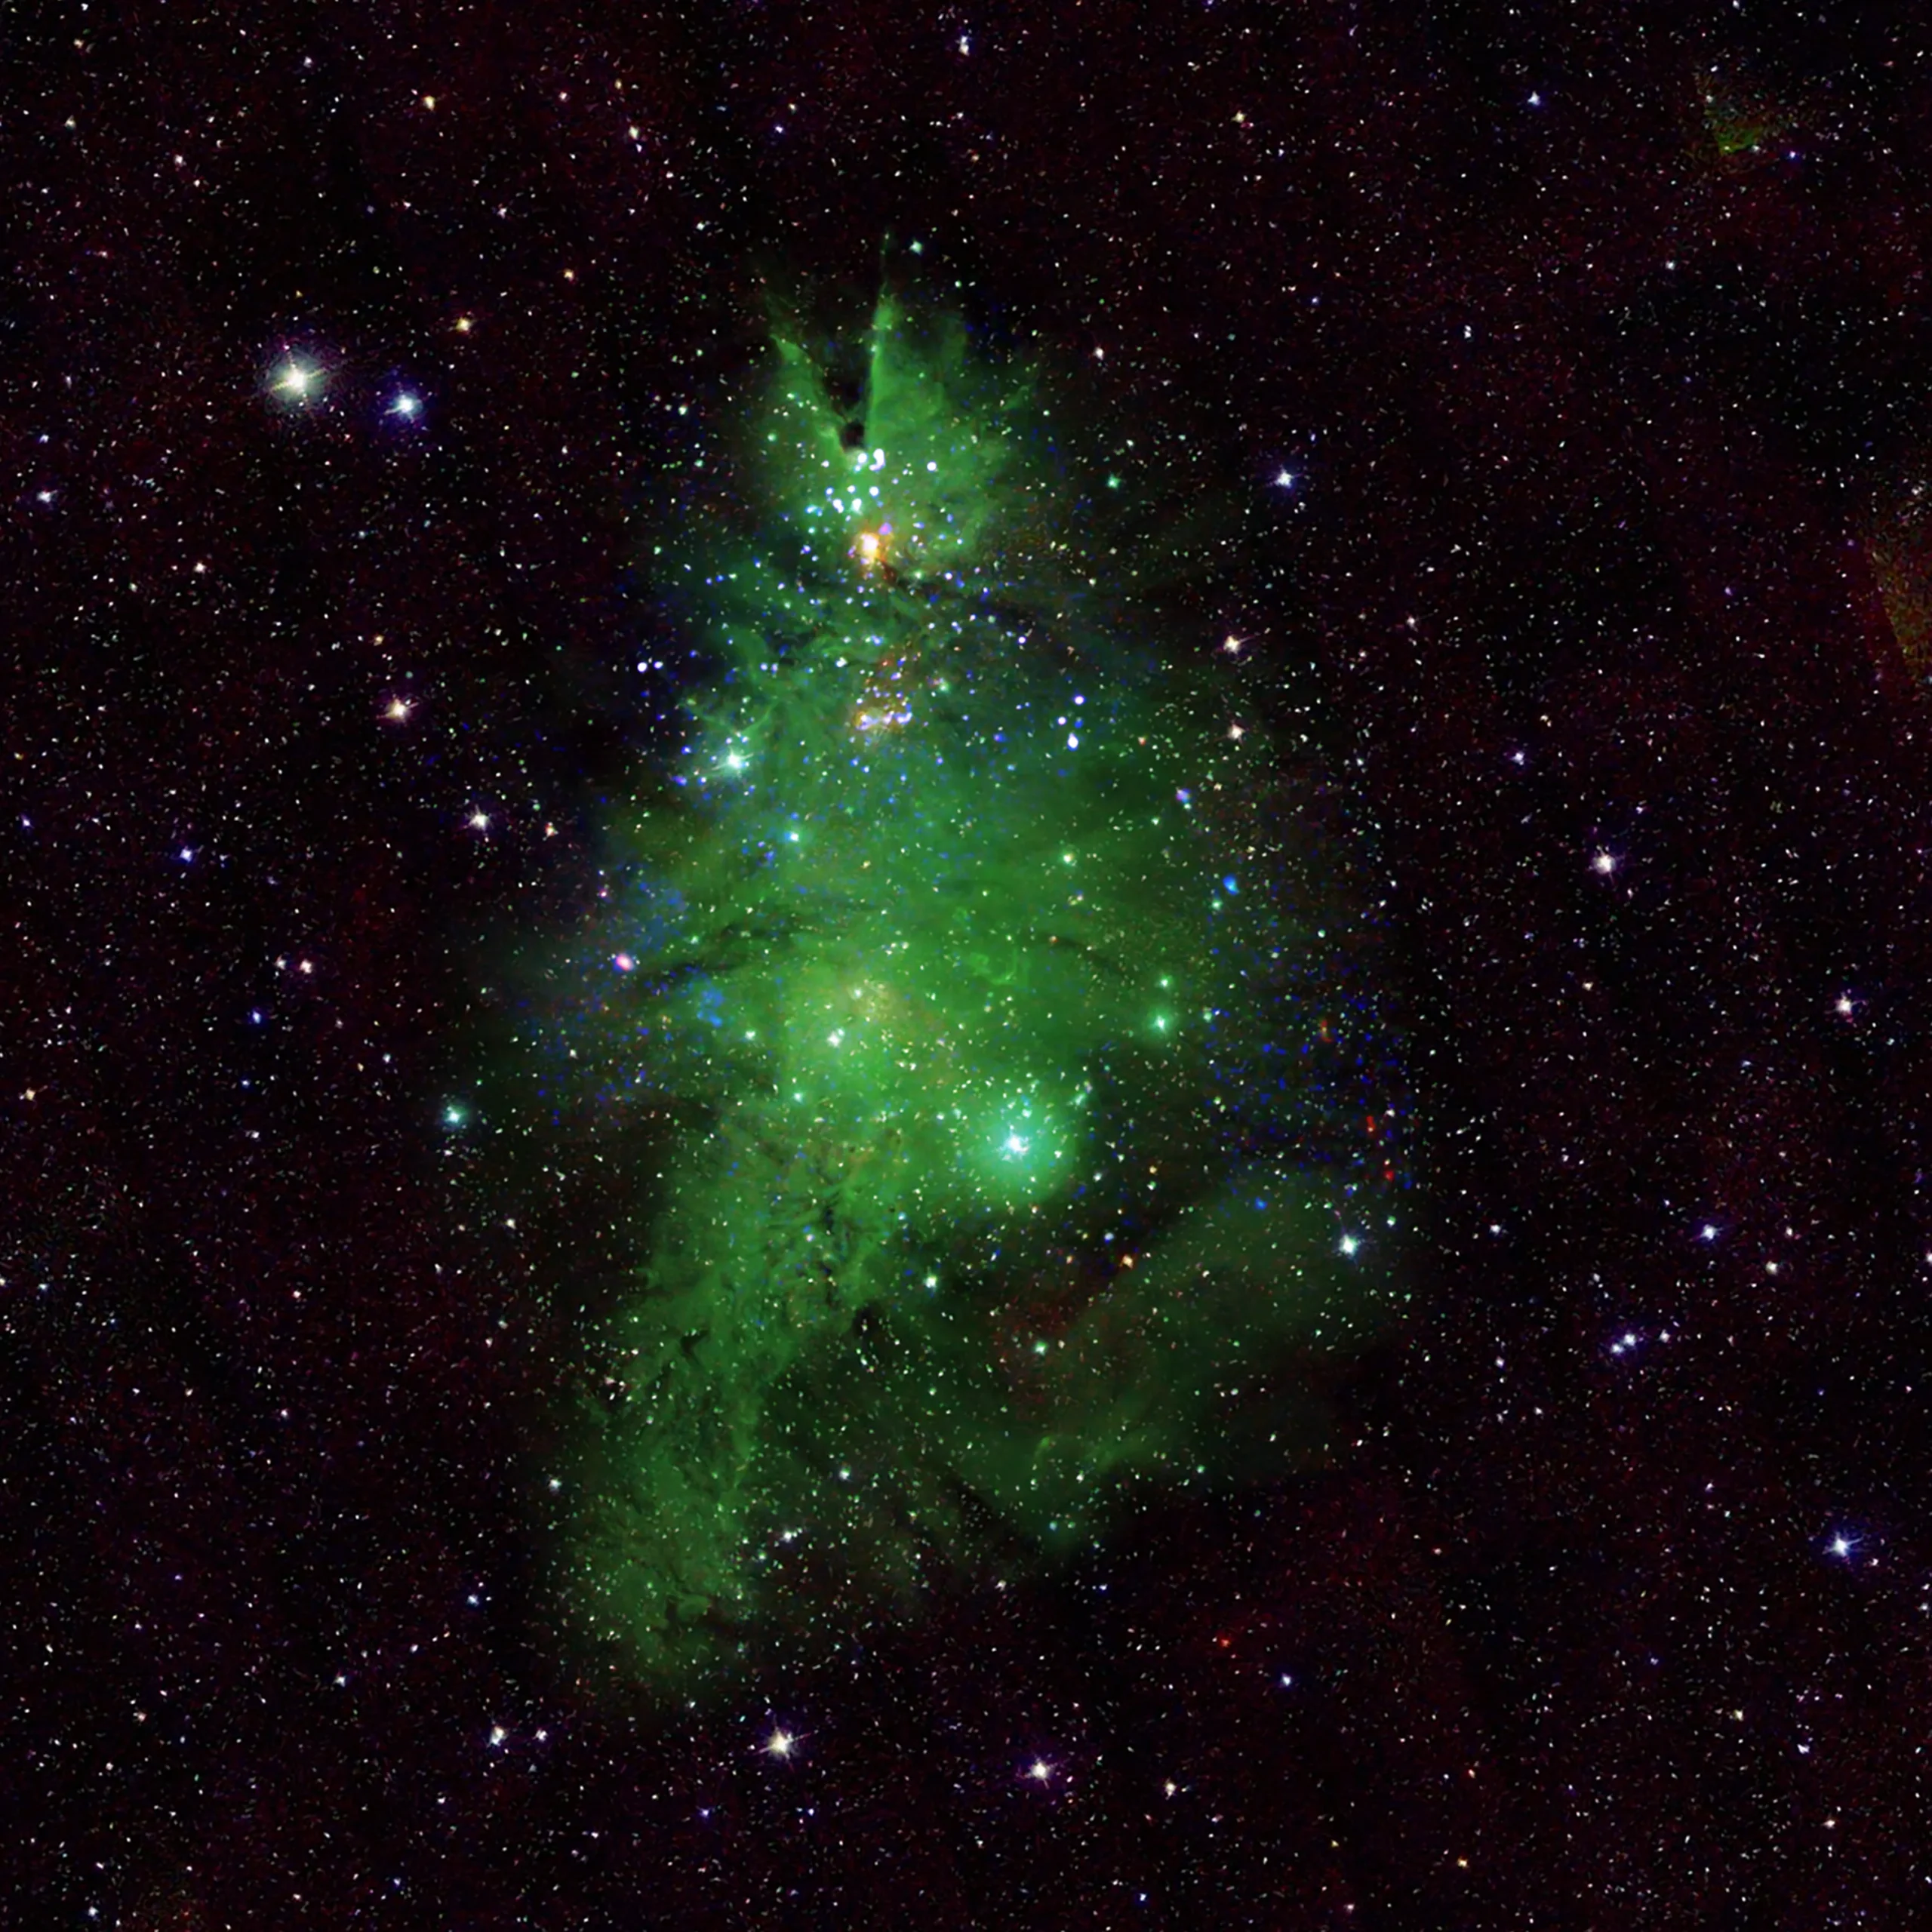 NASA Unveils Cosmic Christmas Tree in New Photo Ahead of the Festival